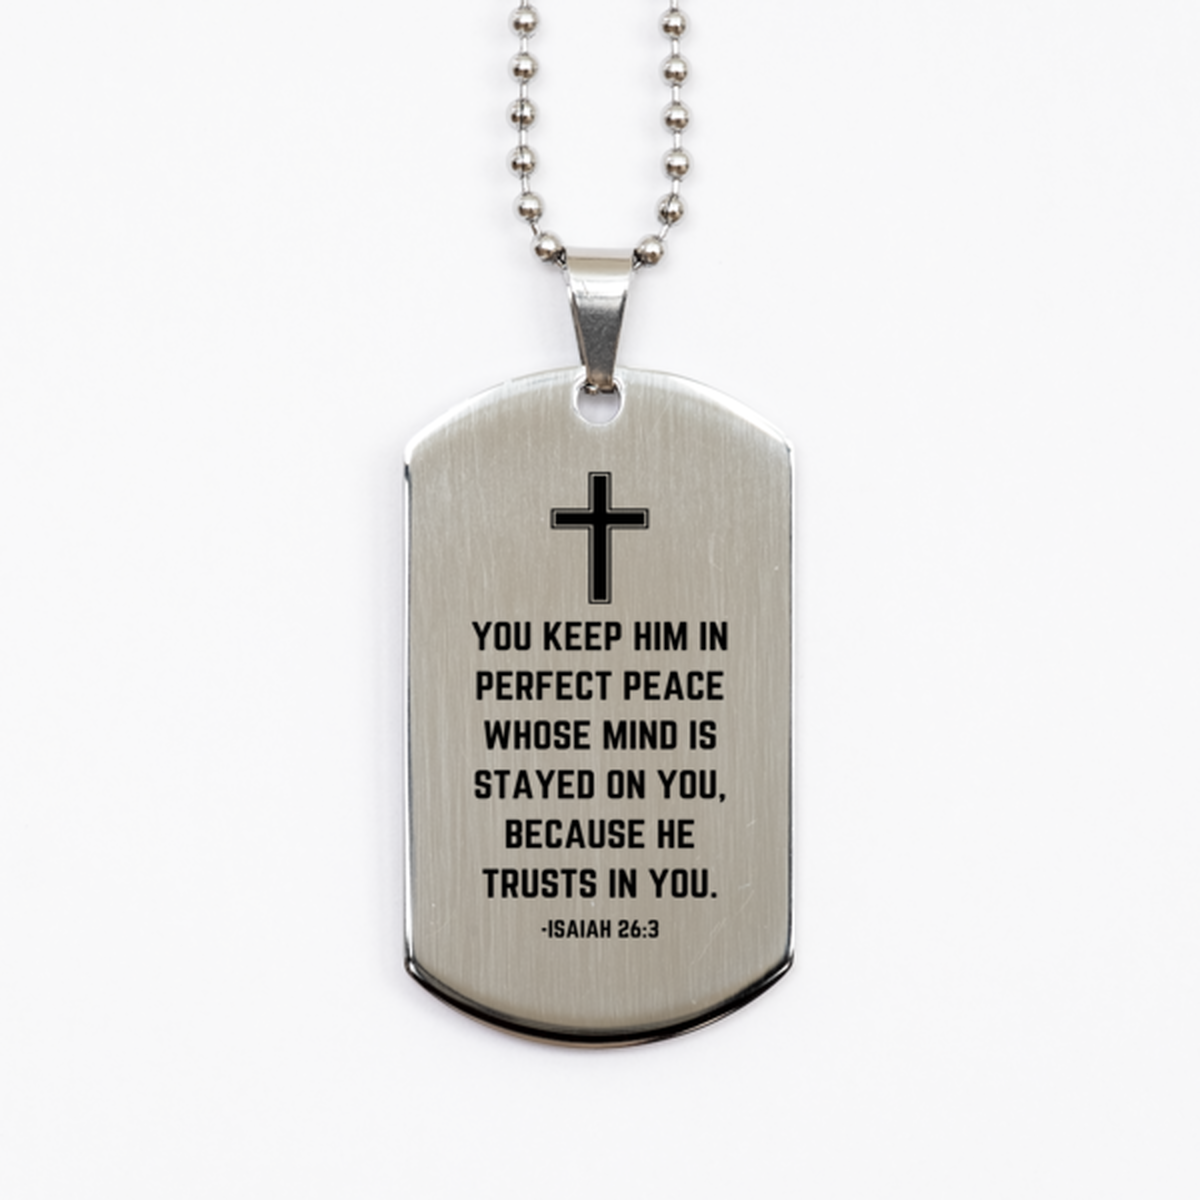 Baptism Gifts For Teenage Boys Girls, Christian Bible Verse Silver Dog Tag, You keep him in perfect peace, Confirmation Gifts, Bible Verse Necklace for Son, Godson, Grandson, Nephew